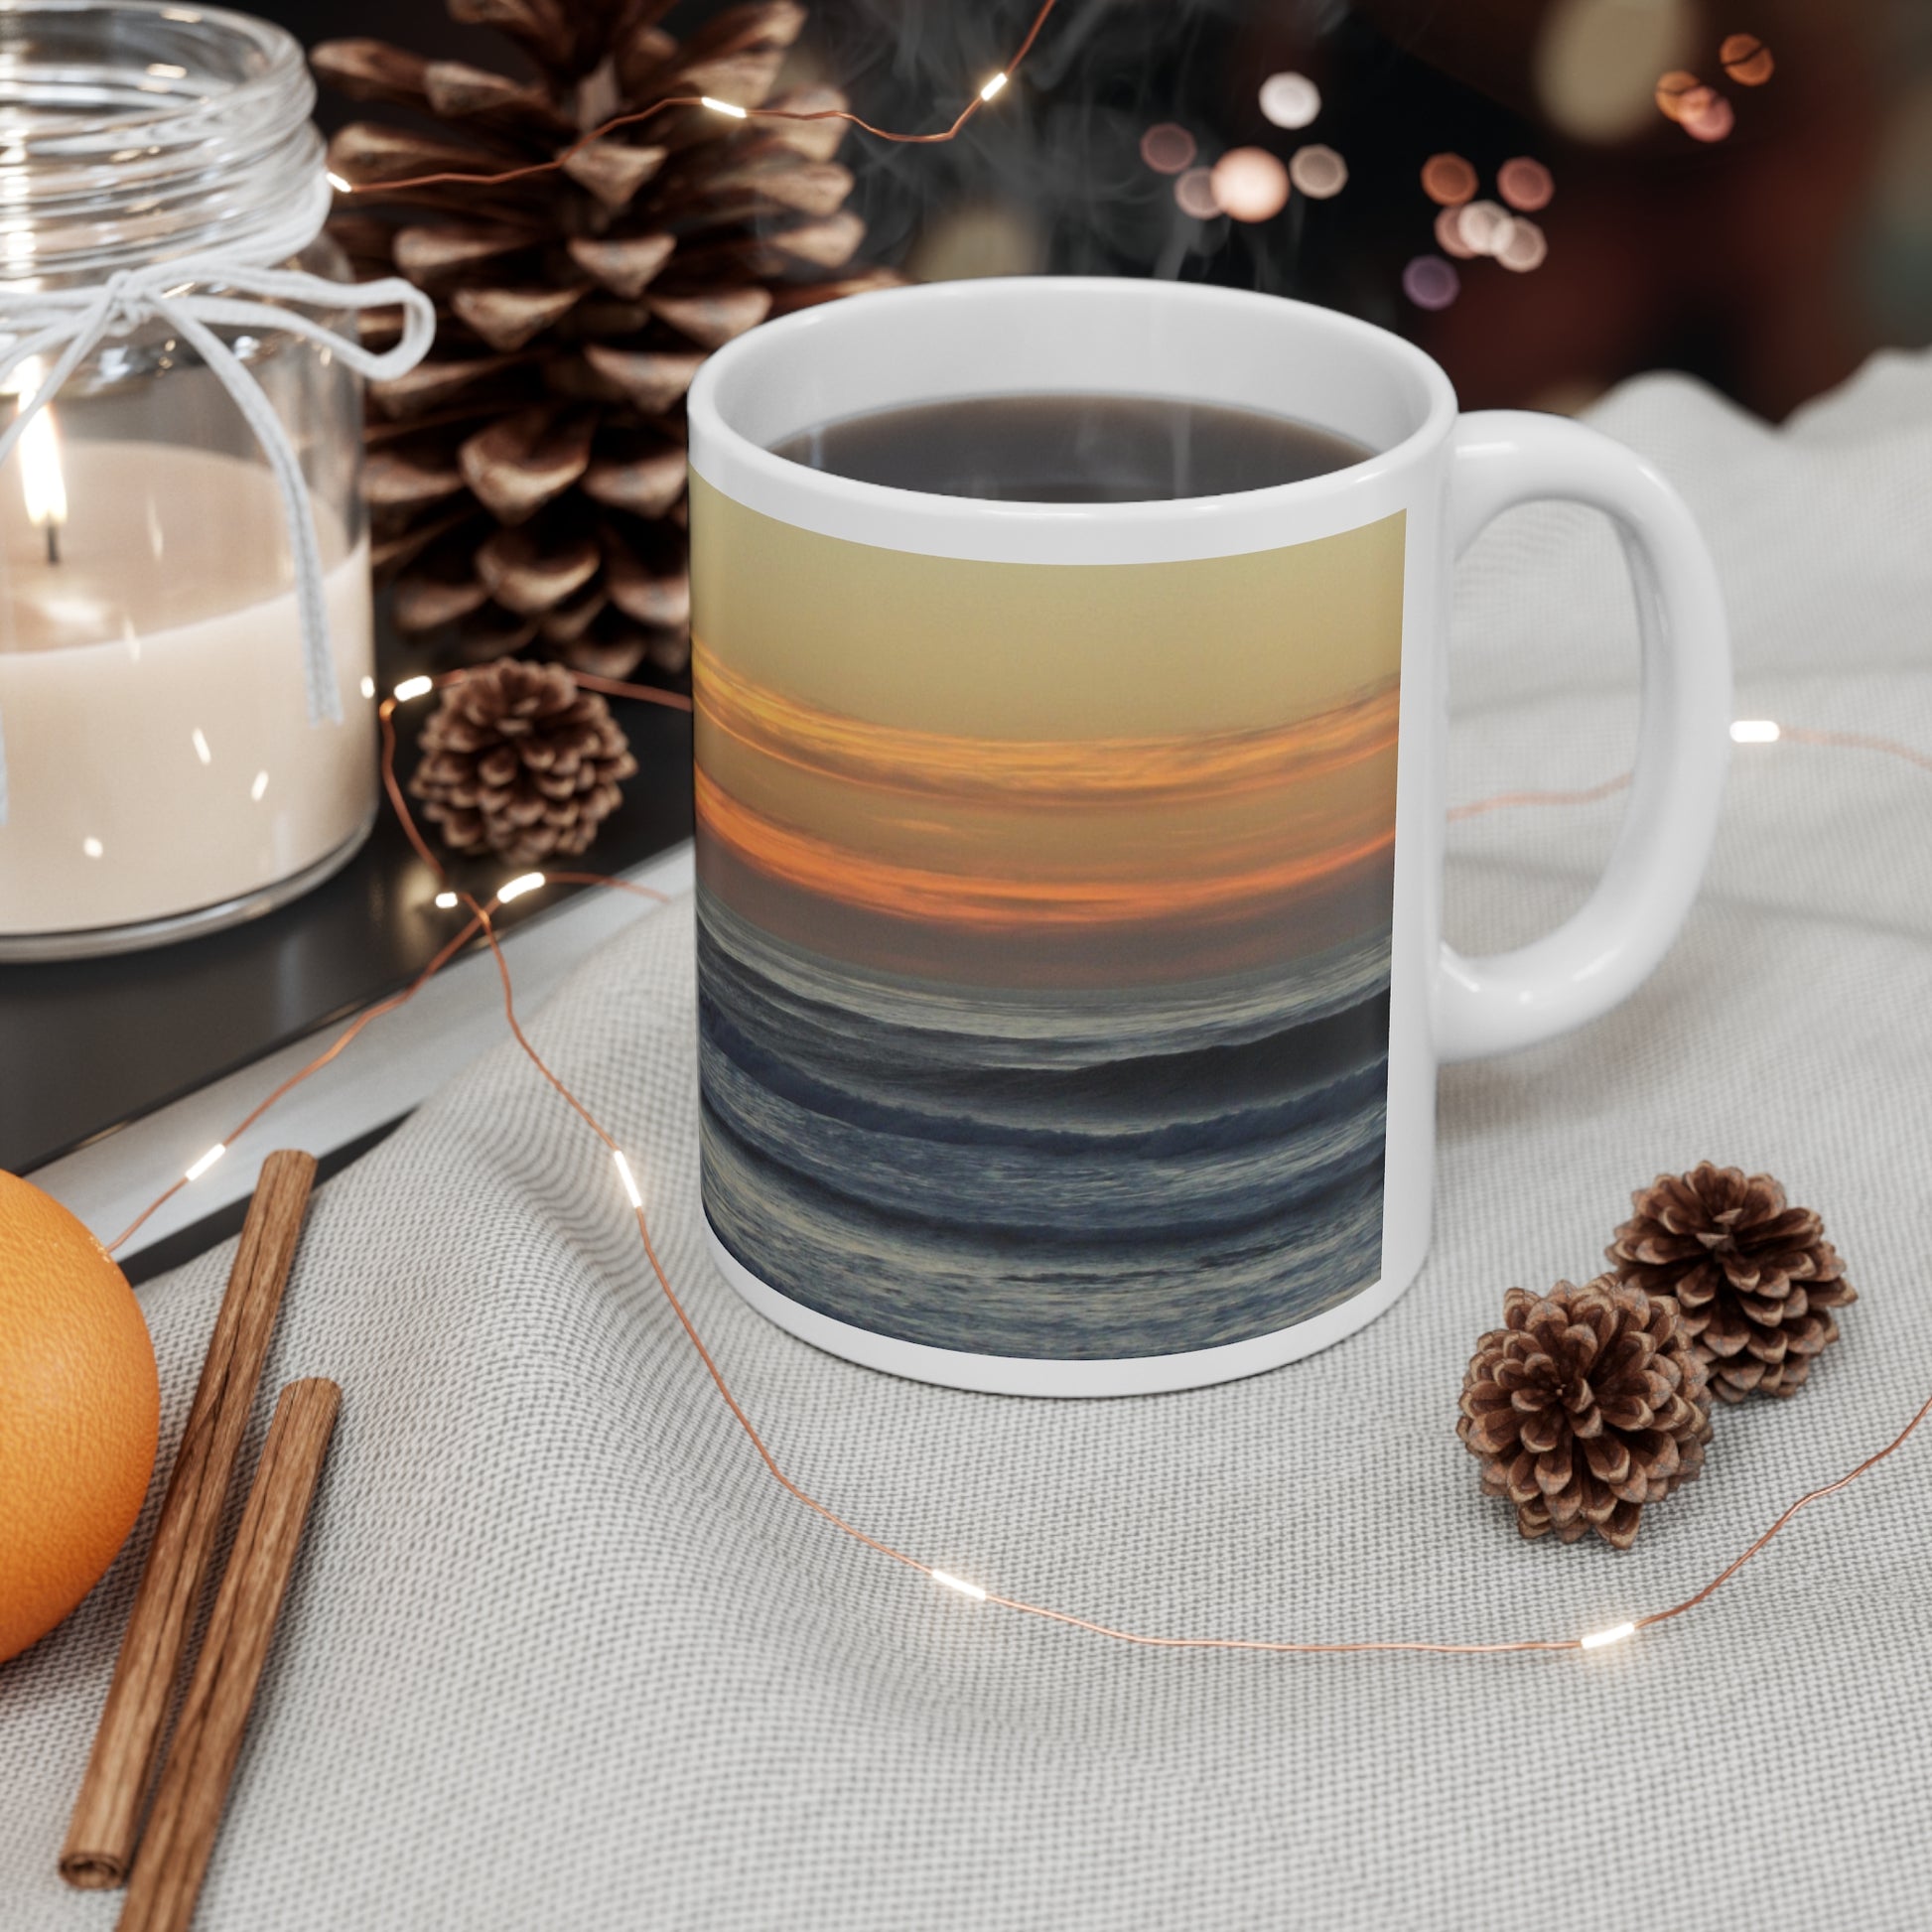 Mock up of mug on a surface with pinecones